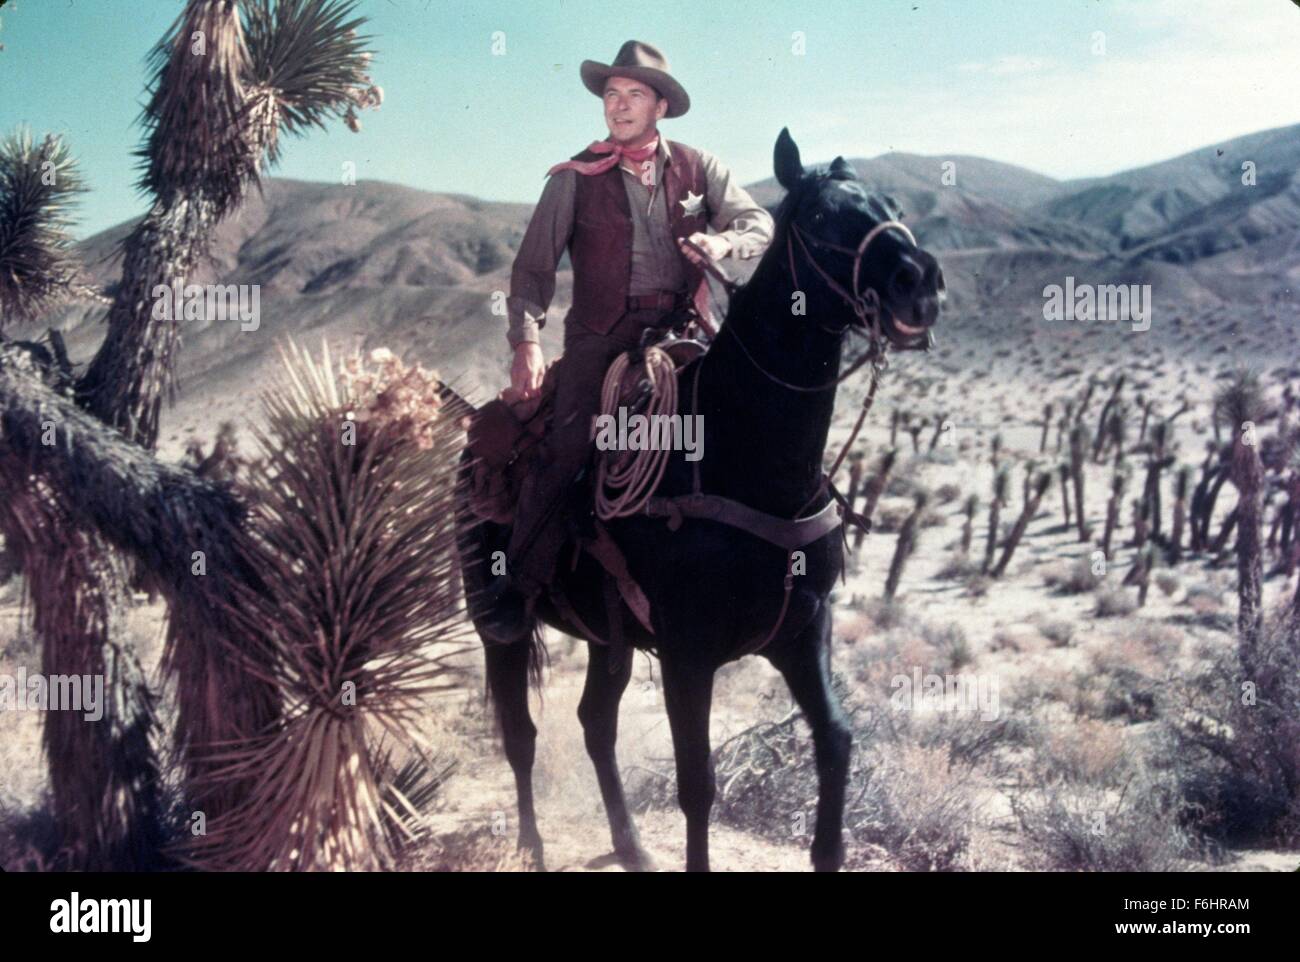 1953, Film Title: LAW AND ORDER, Director: NATHAN JURAN, Studio: UNIV, Pictured: HORSE, COWBOY HAT, RONALD REAGAN, RIDING, WESTERN, SHERIFF, COWBOY, DESERT. (Credit Image: SNAP) Stock Photo